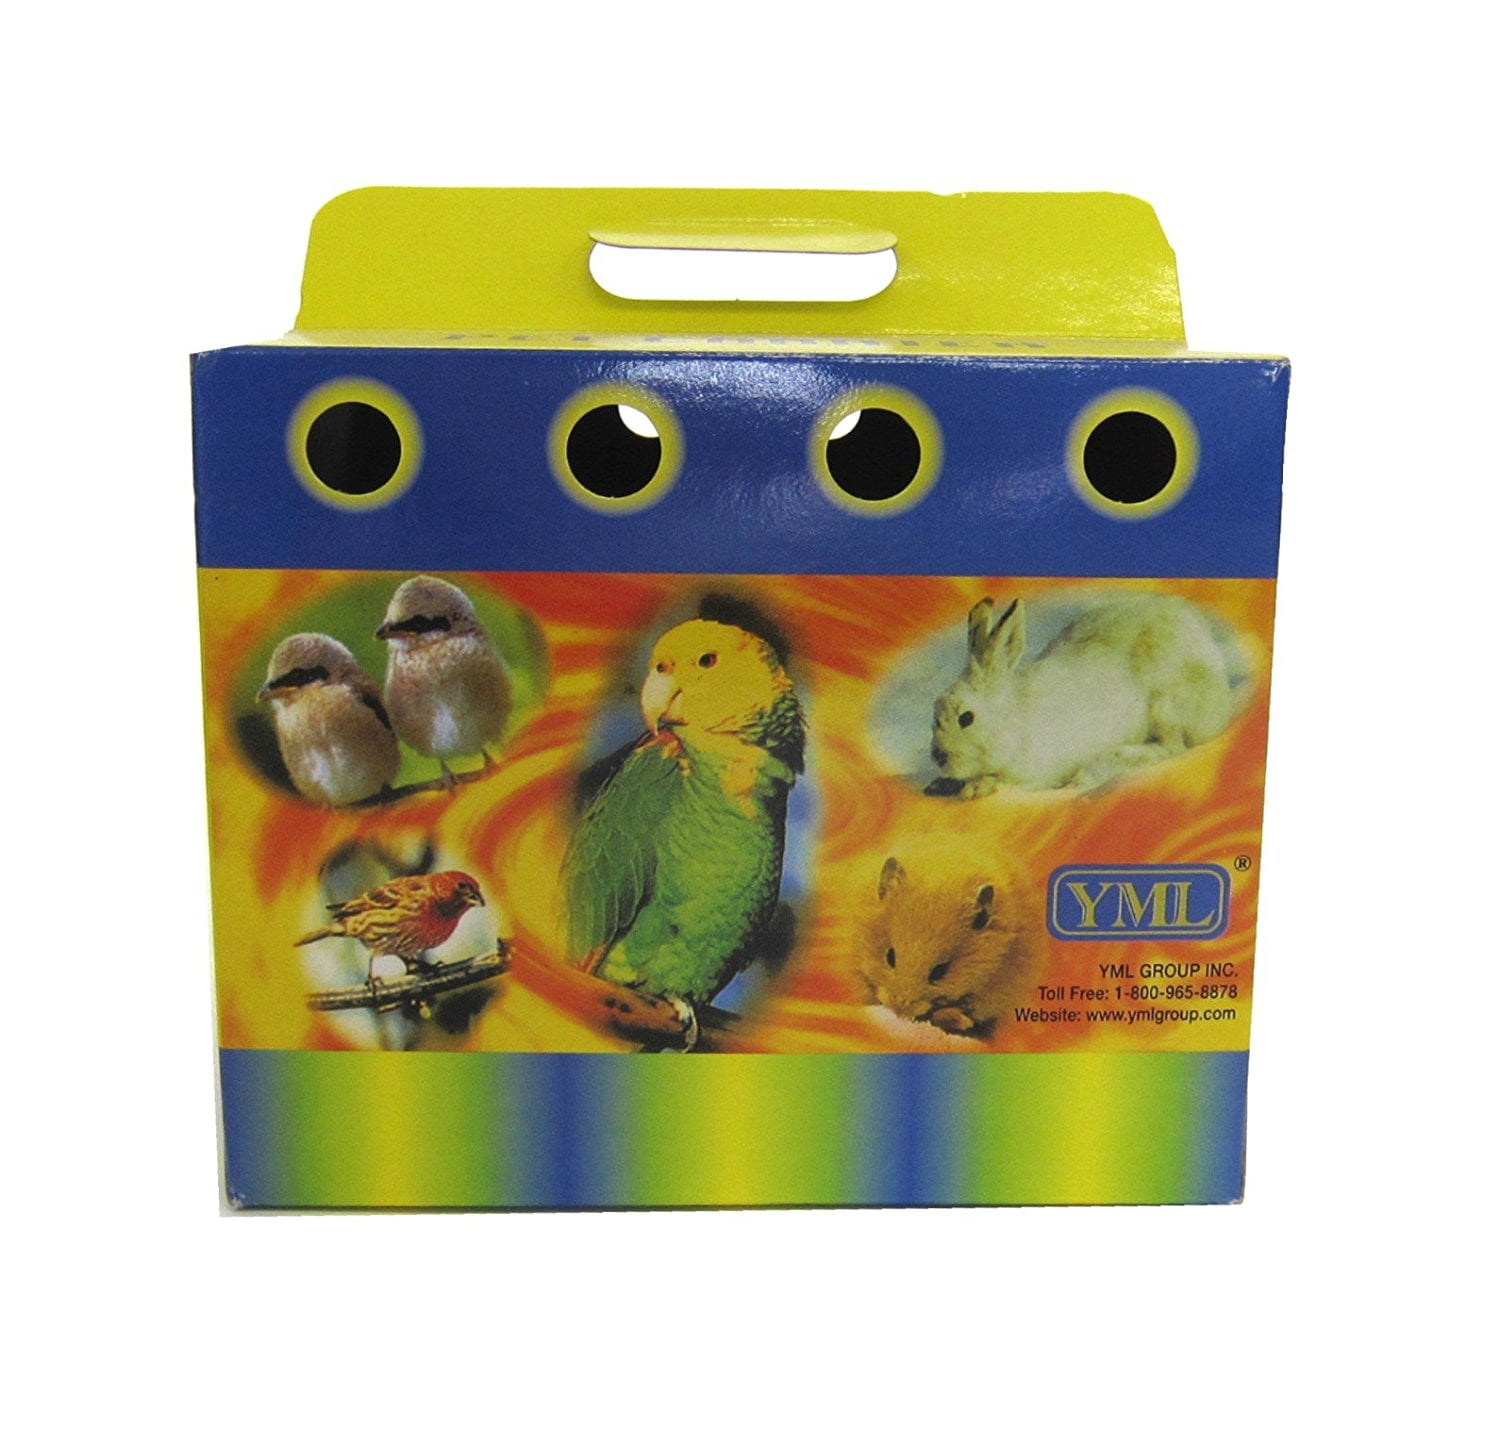 YML Travel Box for Small Animals Lot of 5